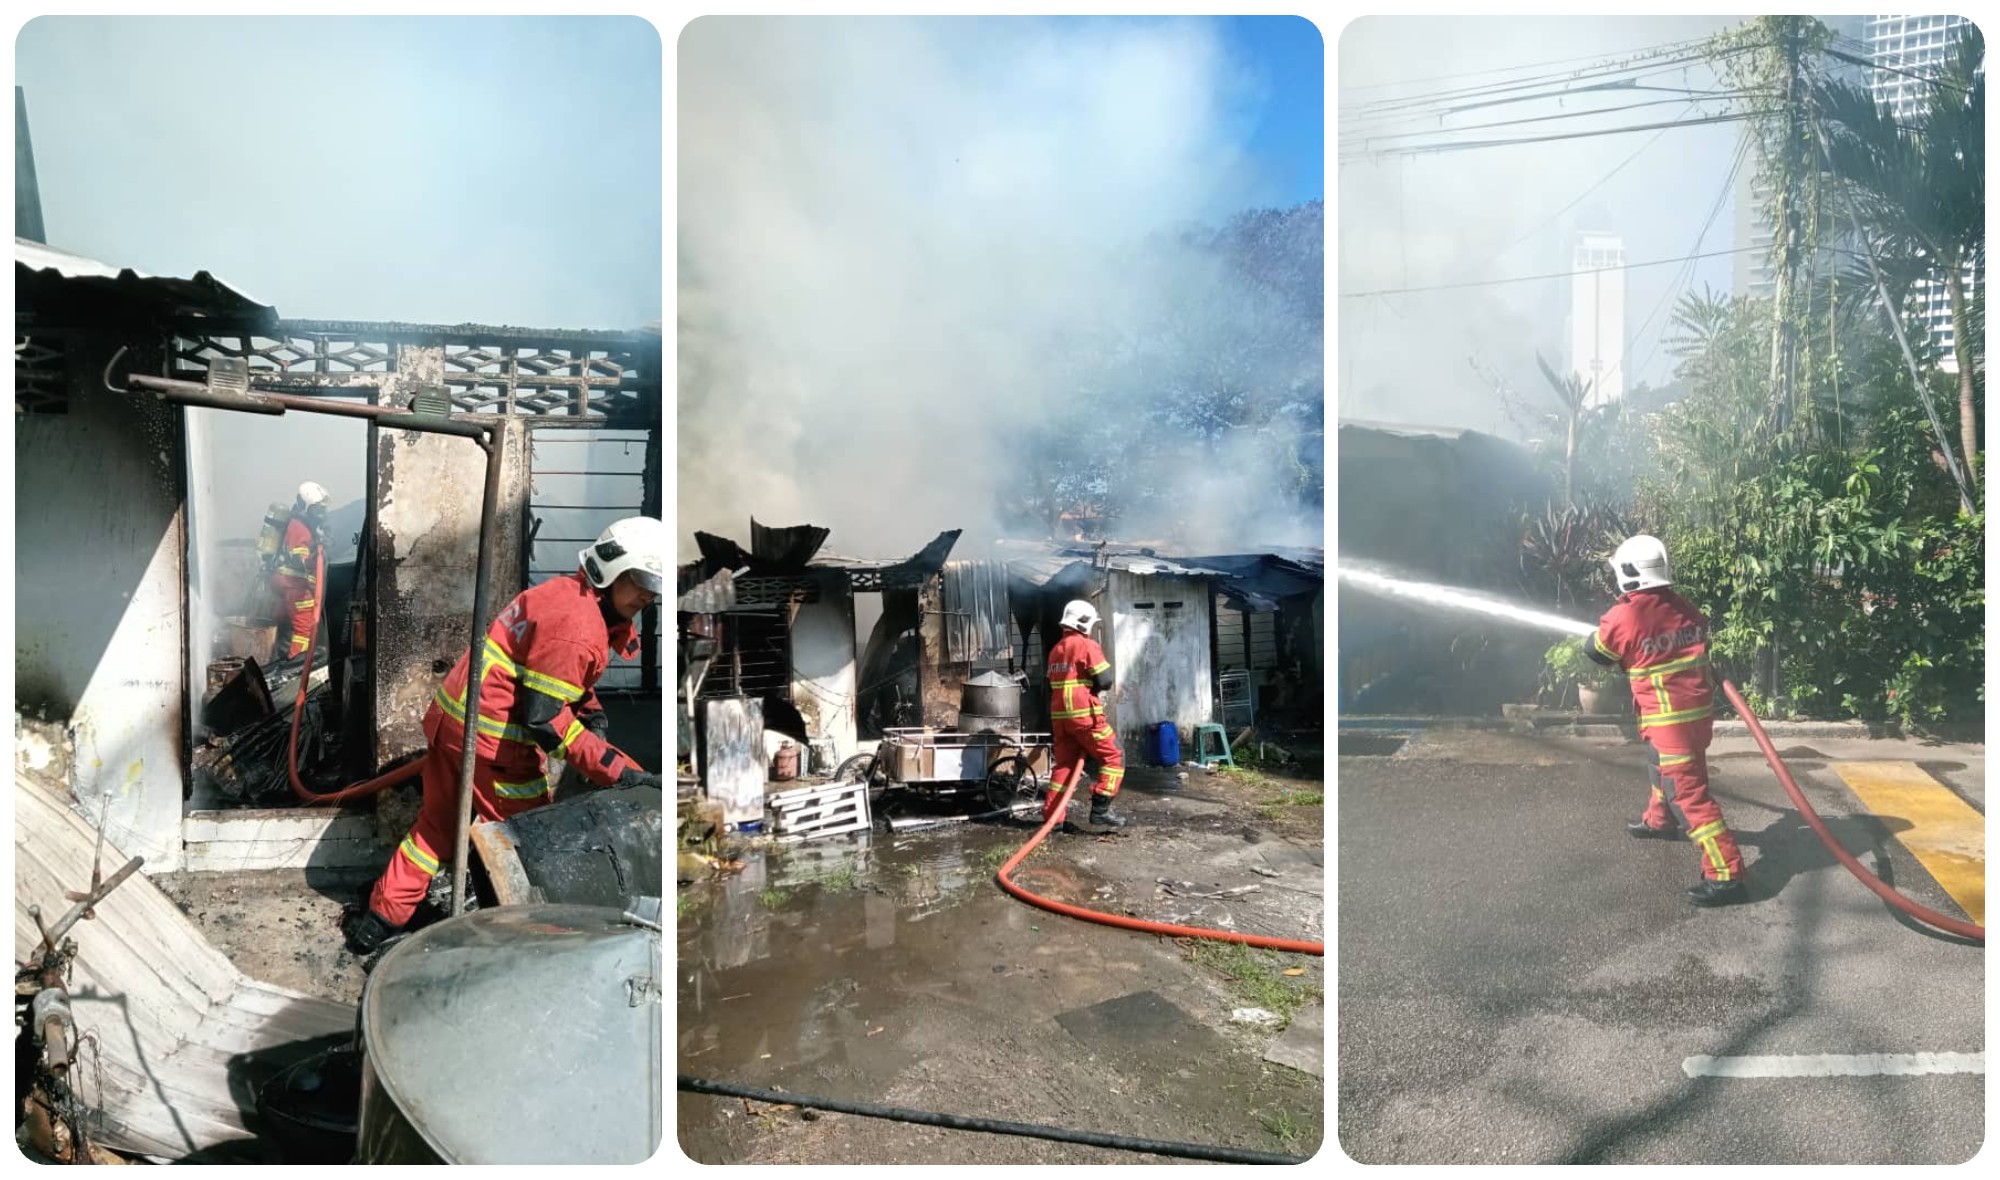 Fire consumes six homes in Kampung Baru, no casualties reported